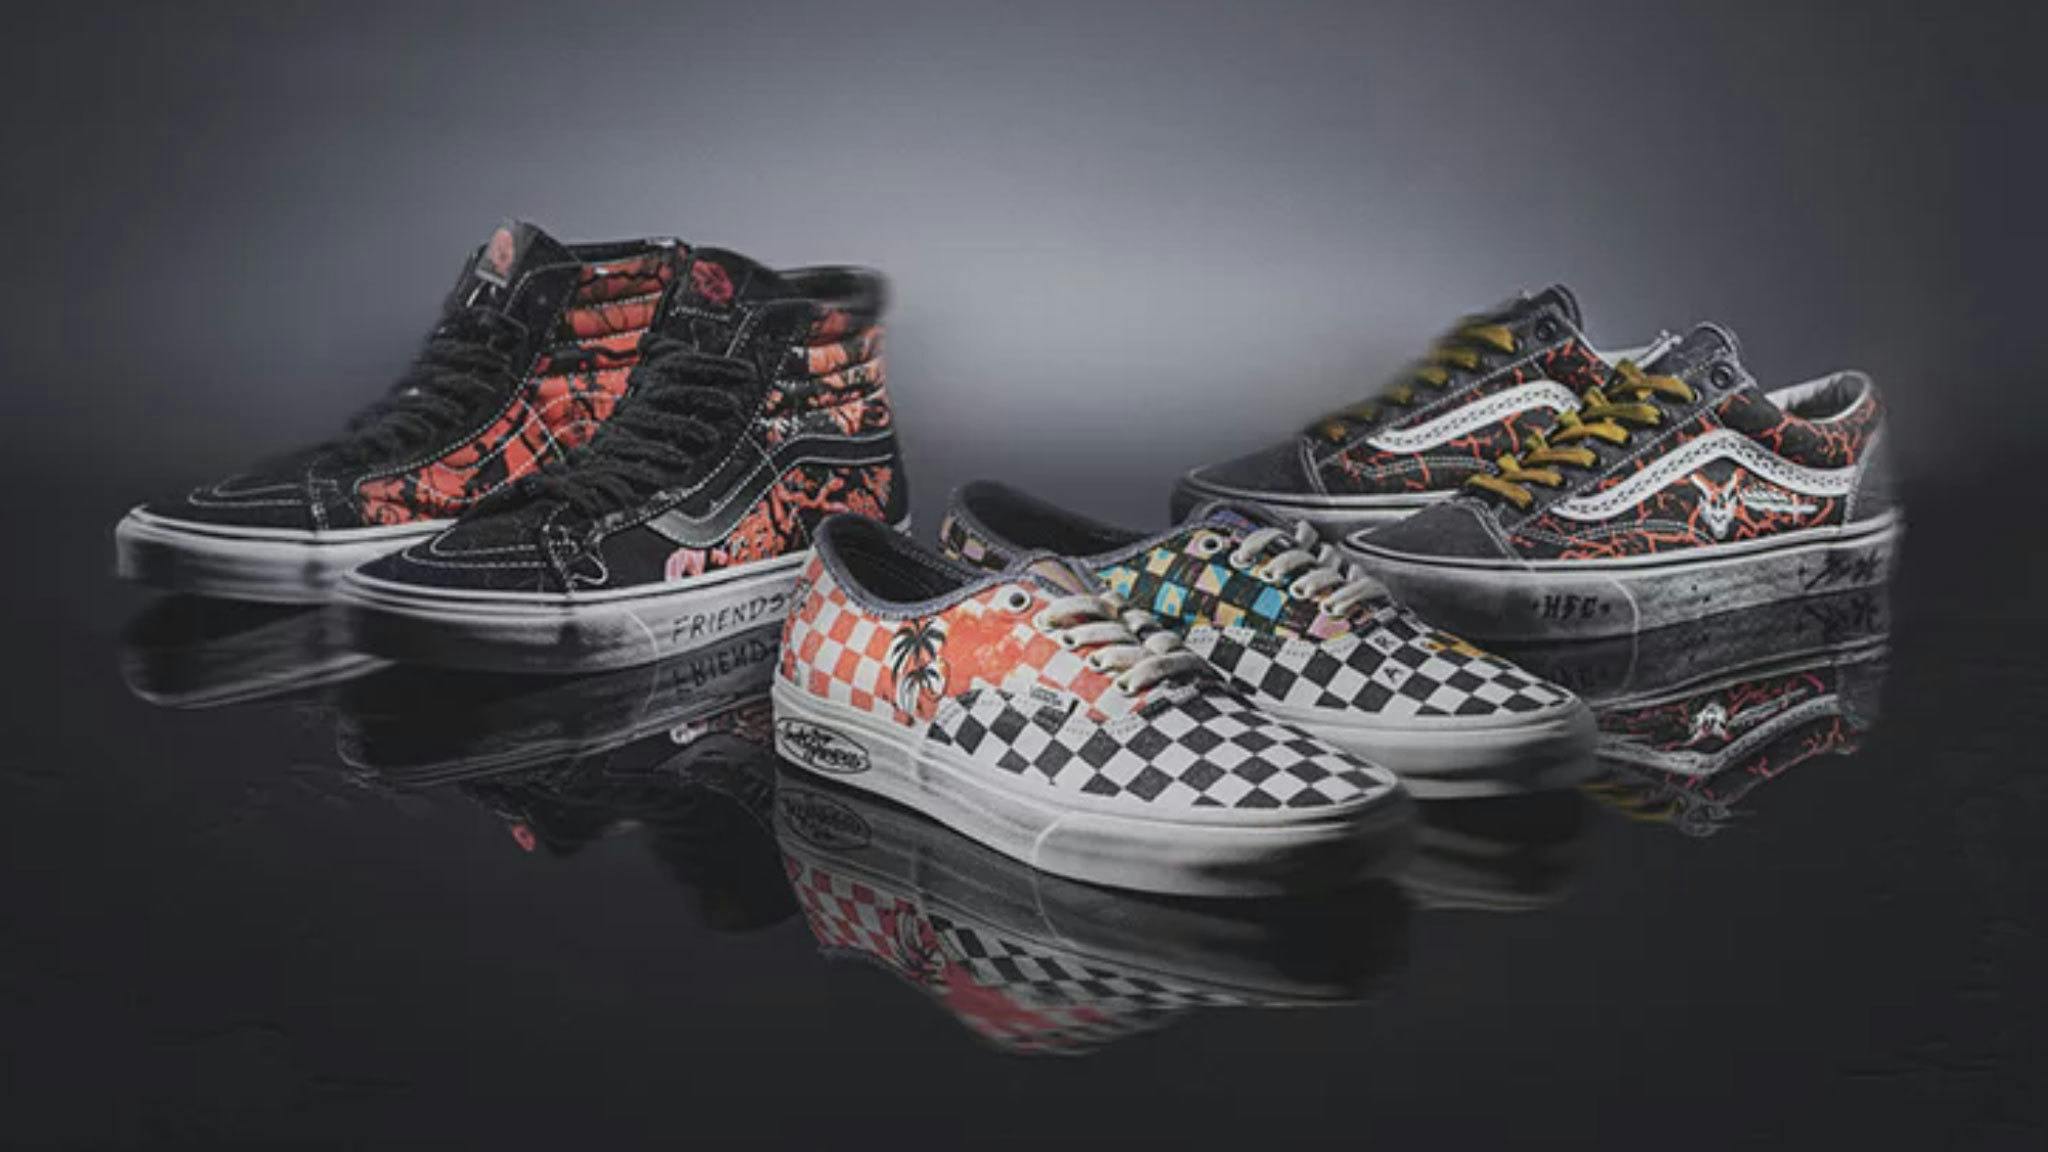 Vans unveil rad new Stranger Things 4 collection